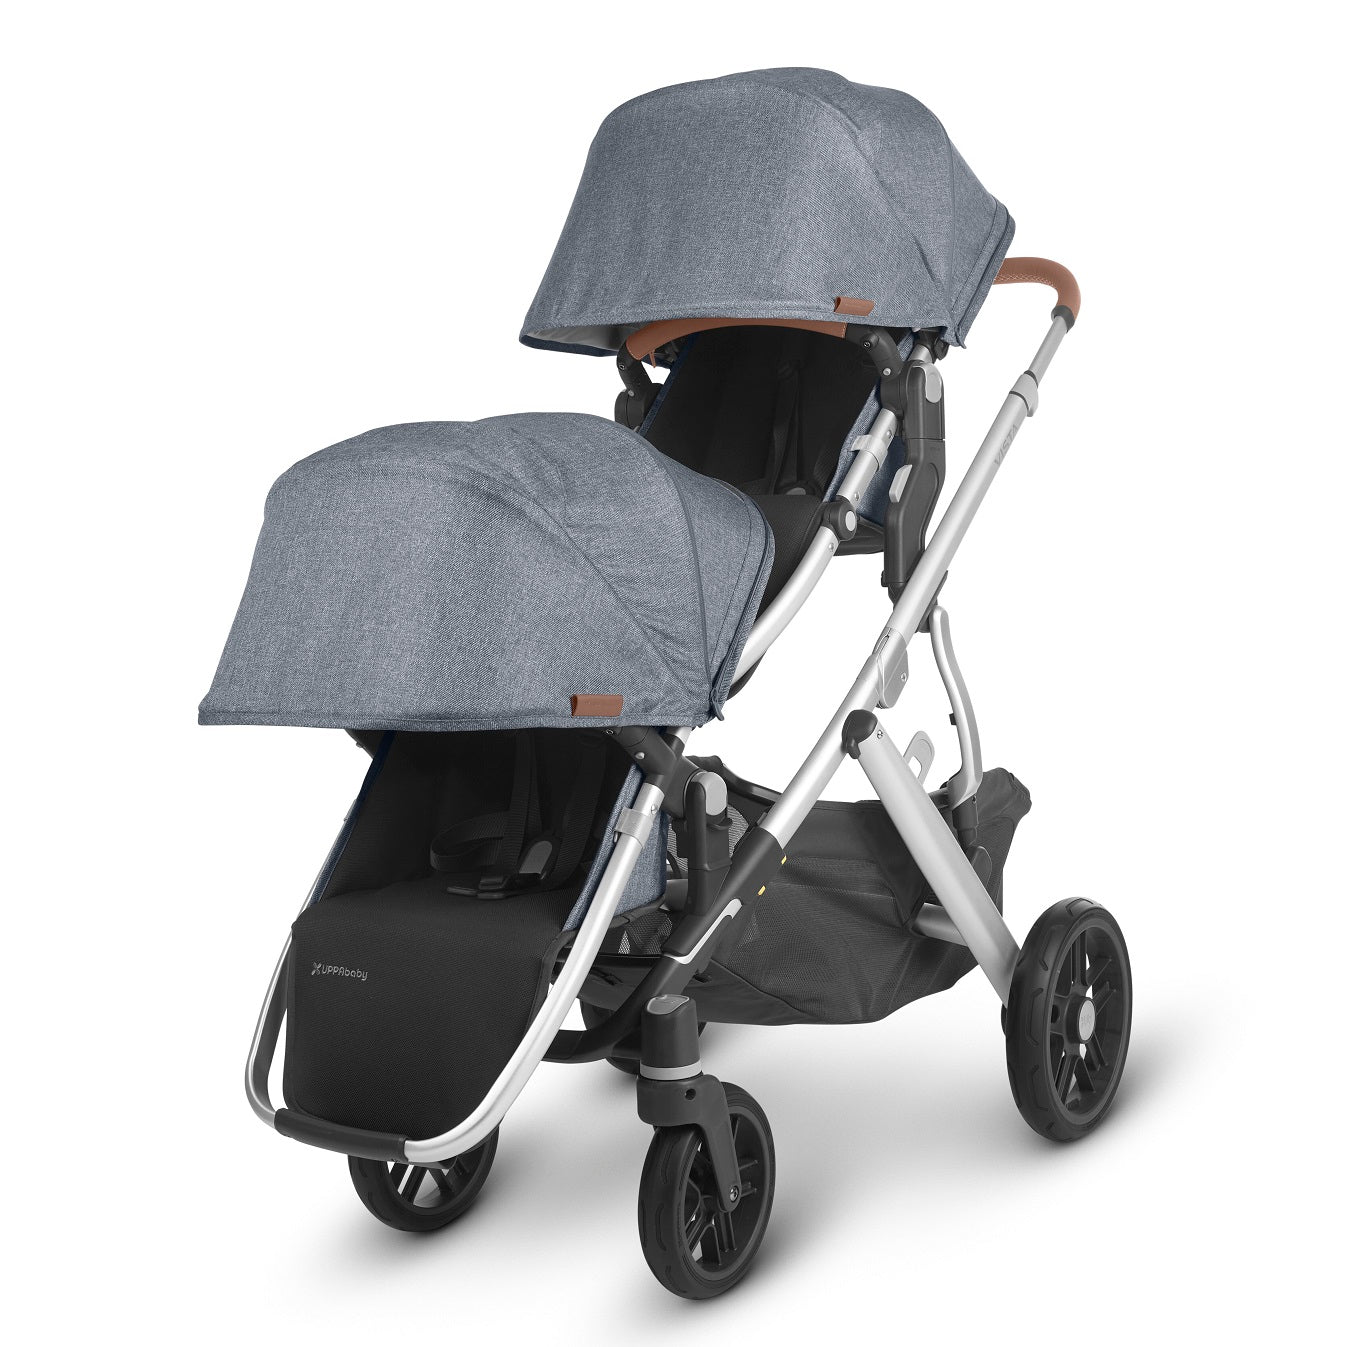 rumble seat uppababy age